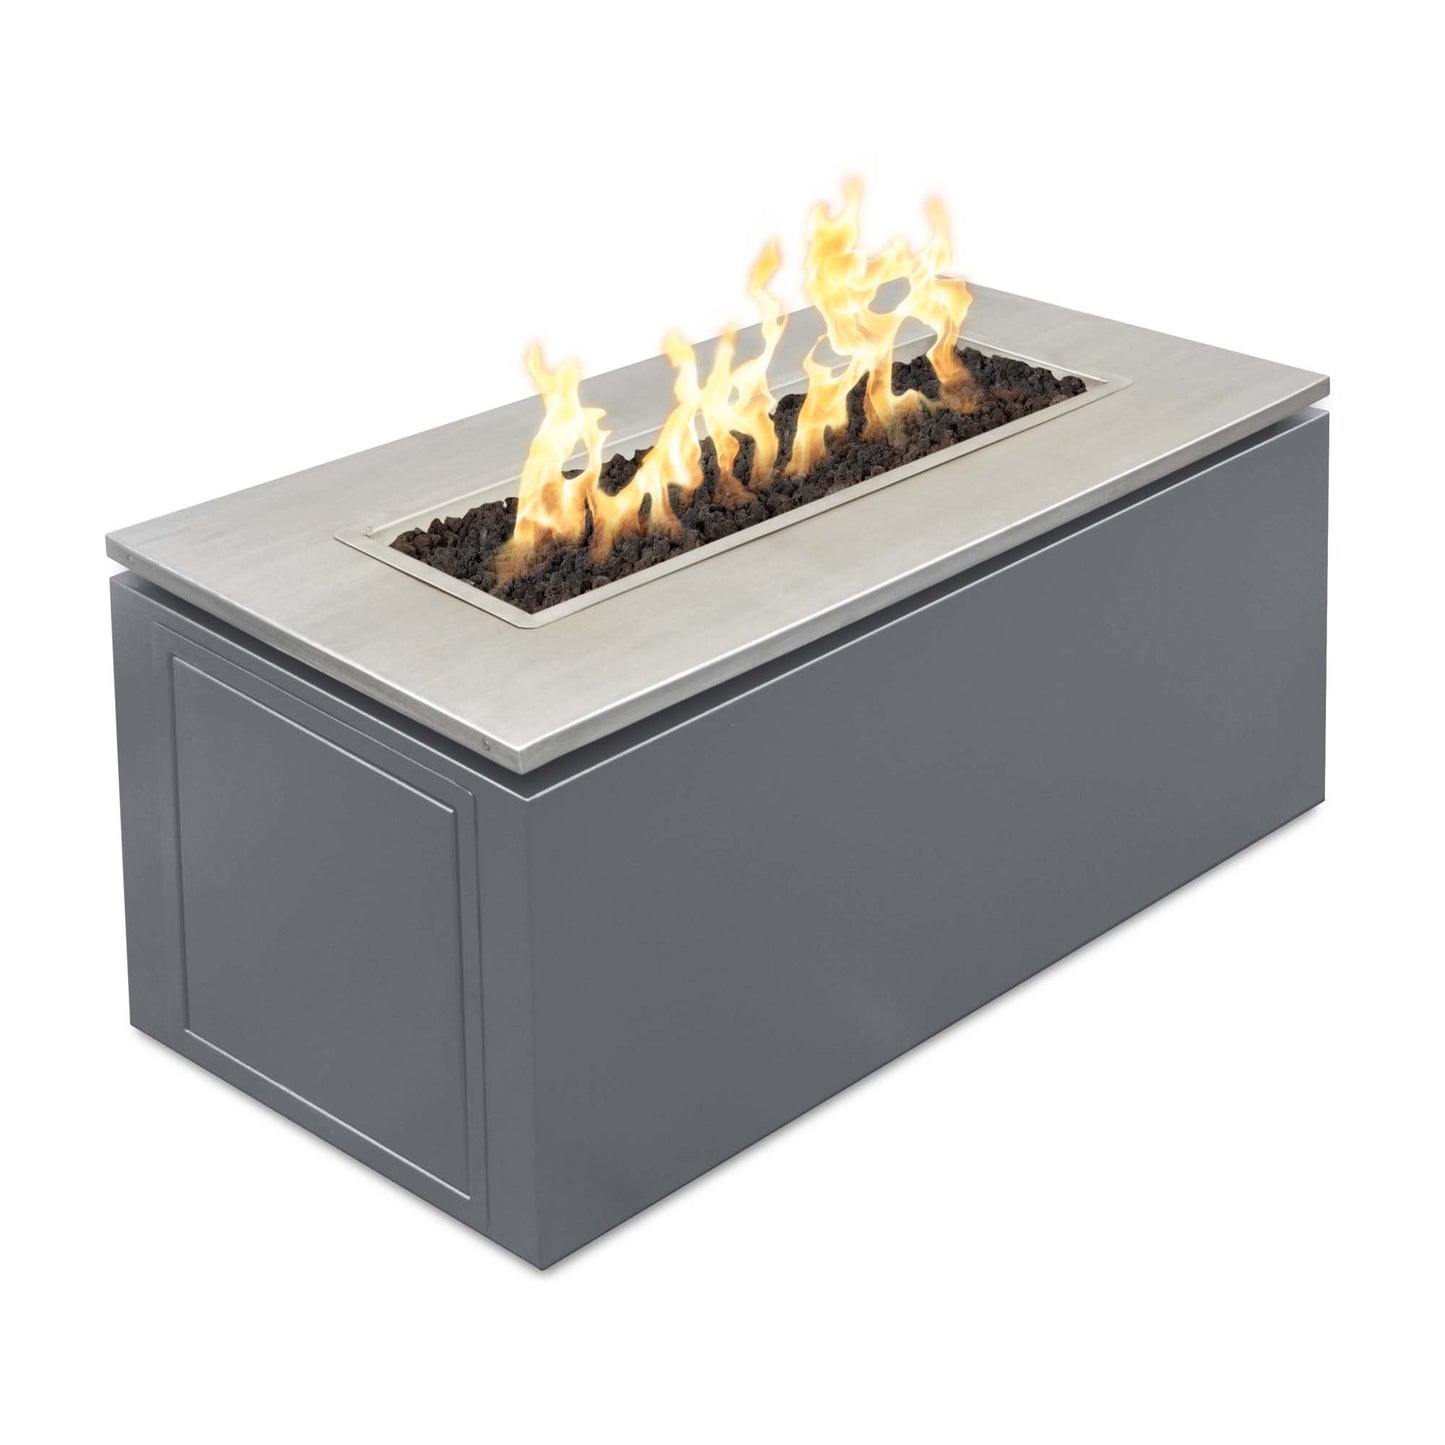 The Outdoor Plus Rectangular Merona 46" Stainless Steel Natural Gas Fire Pit with Match Lit with Flame Sense Ignition